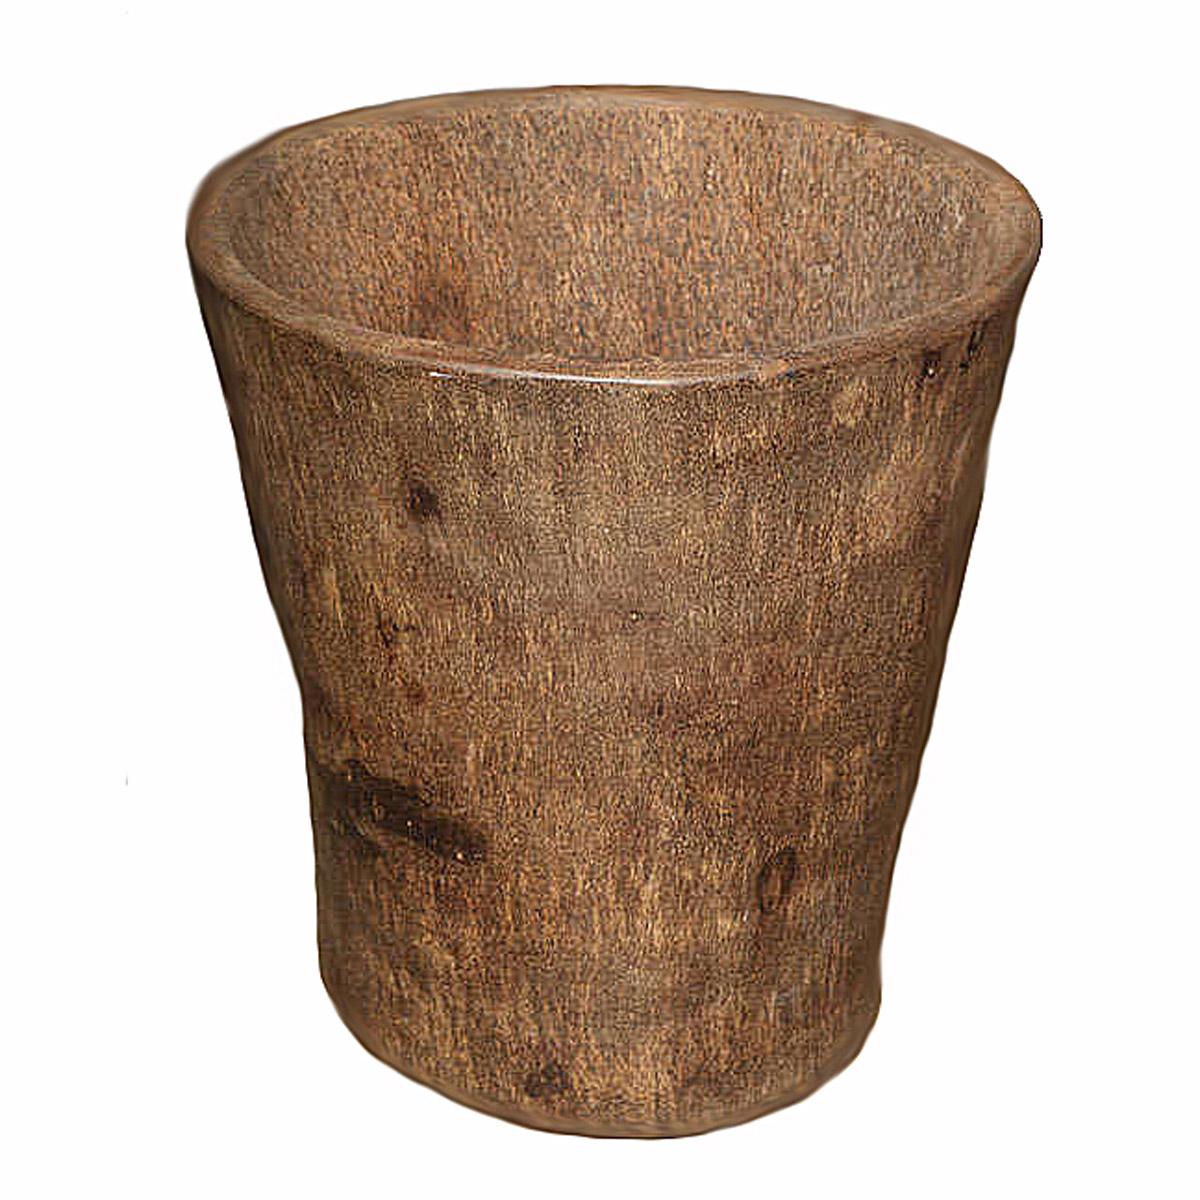 Wood King Sago Palm Container / Planter, Early 20th Century